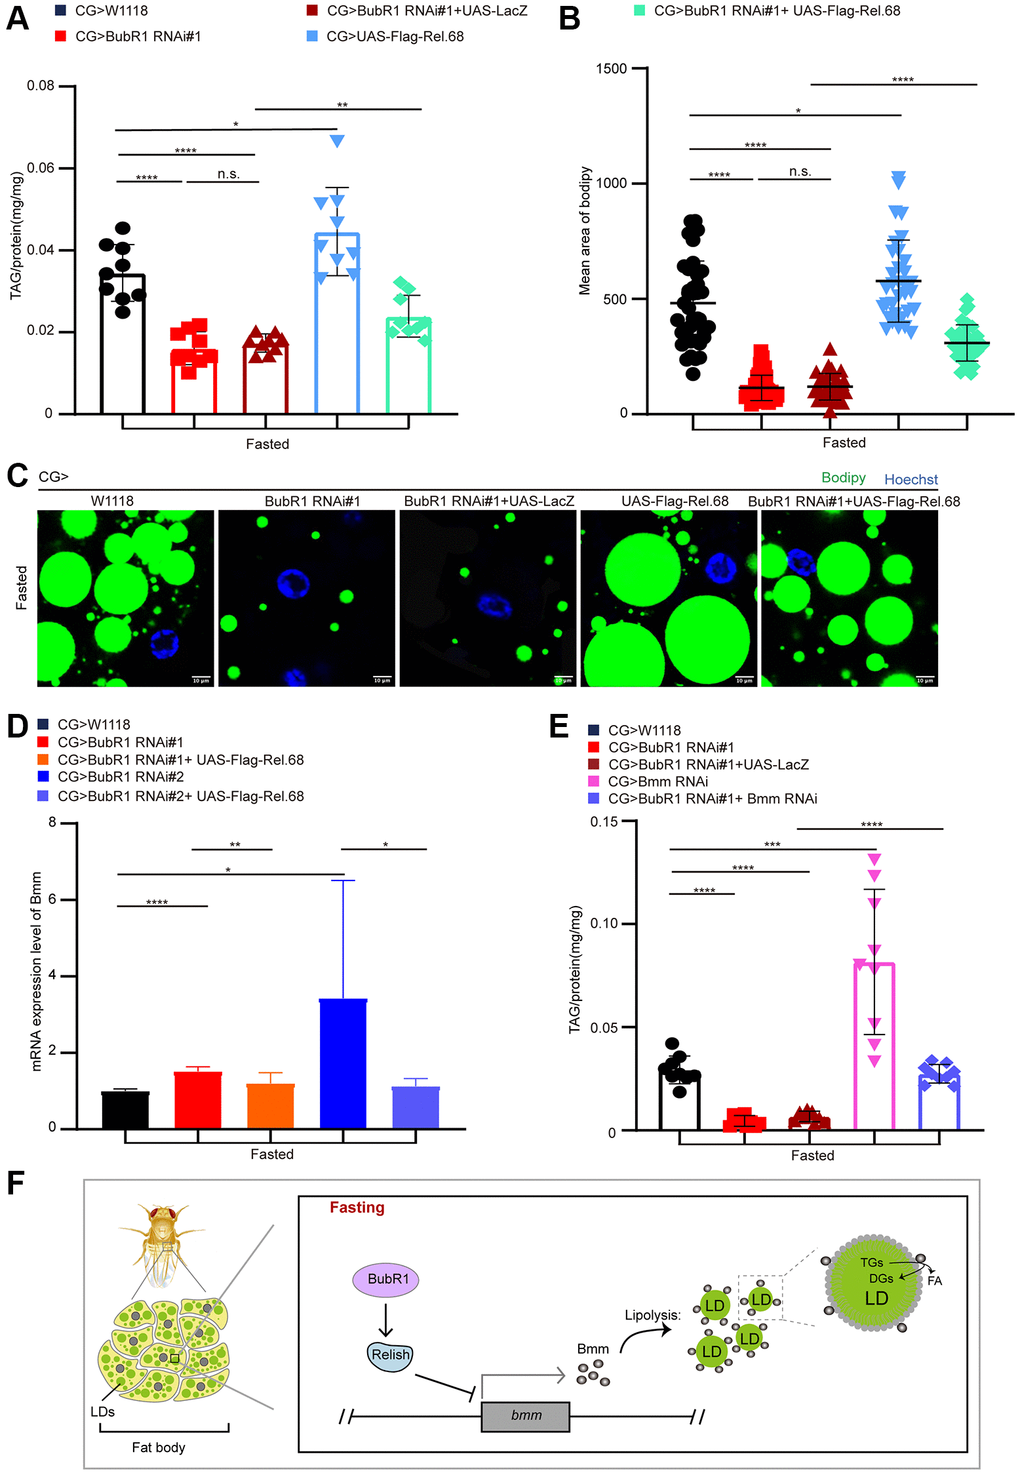 BubR1 suppresses lipolysis by inhibiting Relish-mediated Bmm expression upon fasting. (A) The TAG level of flies with specially expressing W1118, BubR1 RNAi#1, BubR1 RNAi#1+UAS-LacZ, UAS-Flag-Rel.68, and expressing BubR1 RNAi#1 with UAS-Flag-Rel.68 in the fat body driven by CG-GAL4 under starvation. n = 9 samples. (B) Quantification of the mean area of lipid droplets among the more than 30 ROI (region of interest) in flies under starvation with expressing W1118, BubR1 RNAi#1, UAS-Flag-Rel.68, and expressing BubR1 RNAi#1 with UAS-Flag-Rel.68 in the fat body. Each dot corresponds to one ROI. (C) Bodipy staining of flies with expressing W1118, BubR1 RNAi, UAS-Flag-Rel.68, and expressing BubR1 RNAi with UAS-Flag-Rel.68 in the fat body. Bodipy (neutral lipids; green) and Hoechst (Hoechst; blue) detected by fluorescent histochemistry. (D) The Bmm mRNA level of flies with expressing W1118, BubR1 RNAi, and expressing BubR1 RNAi with UAS-Flag-Rel.68 in the fat body via CG-GAL4. Results are representative of three biological repetitions. (E) The TAG level of flies with specially expressing W1118, BubR1 RNAi#1, BubR1 RNAi#1+UAS-LacZ and expressing BubR1 RNAi#1 with Bmm RNAi in the fat body by CG-GAL4. n = 9 samples. (F) Model of BubR1 regulating lipid metabolism under starvation. Scale bars represent 10 μm (C). Without noted, Data are presented as mean and SD. Student’s t-tests are performed. *p **p ***p ****p p > 0.05.